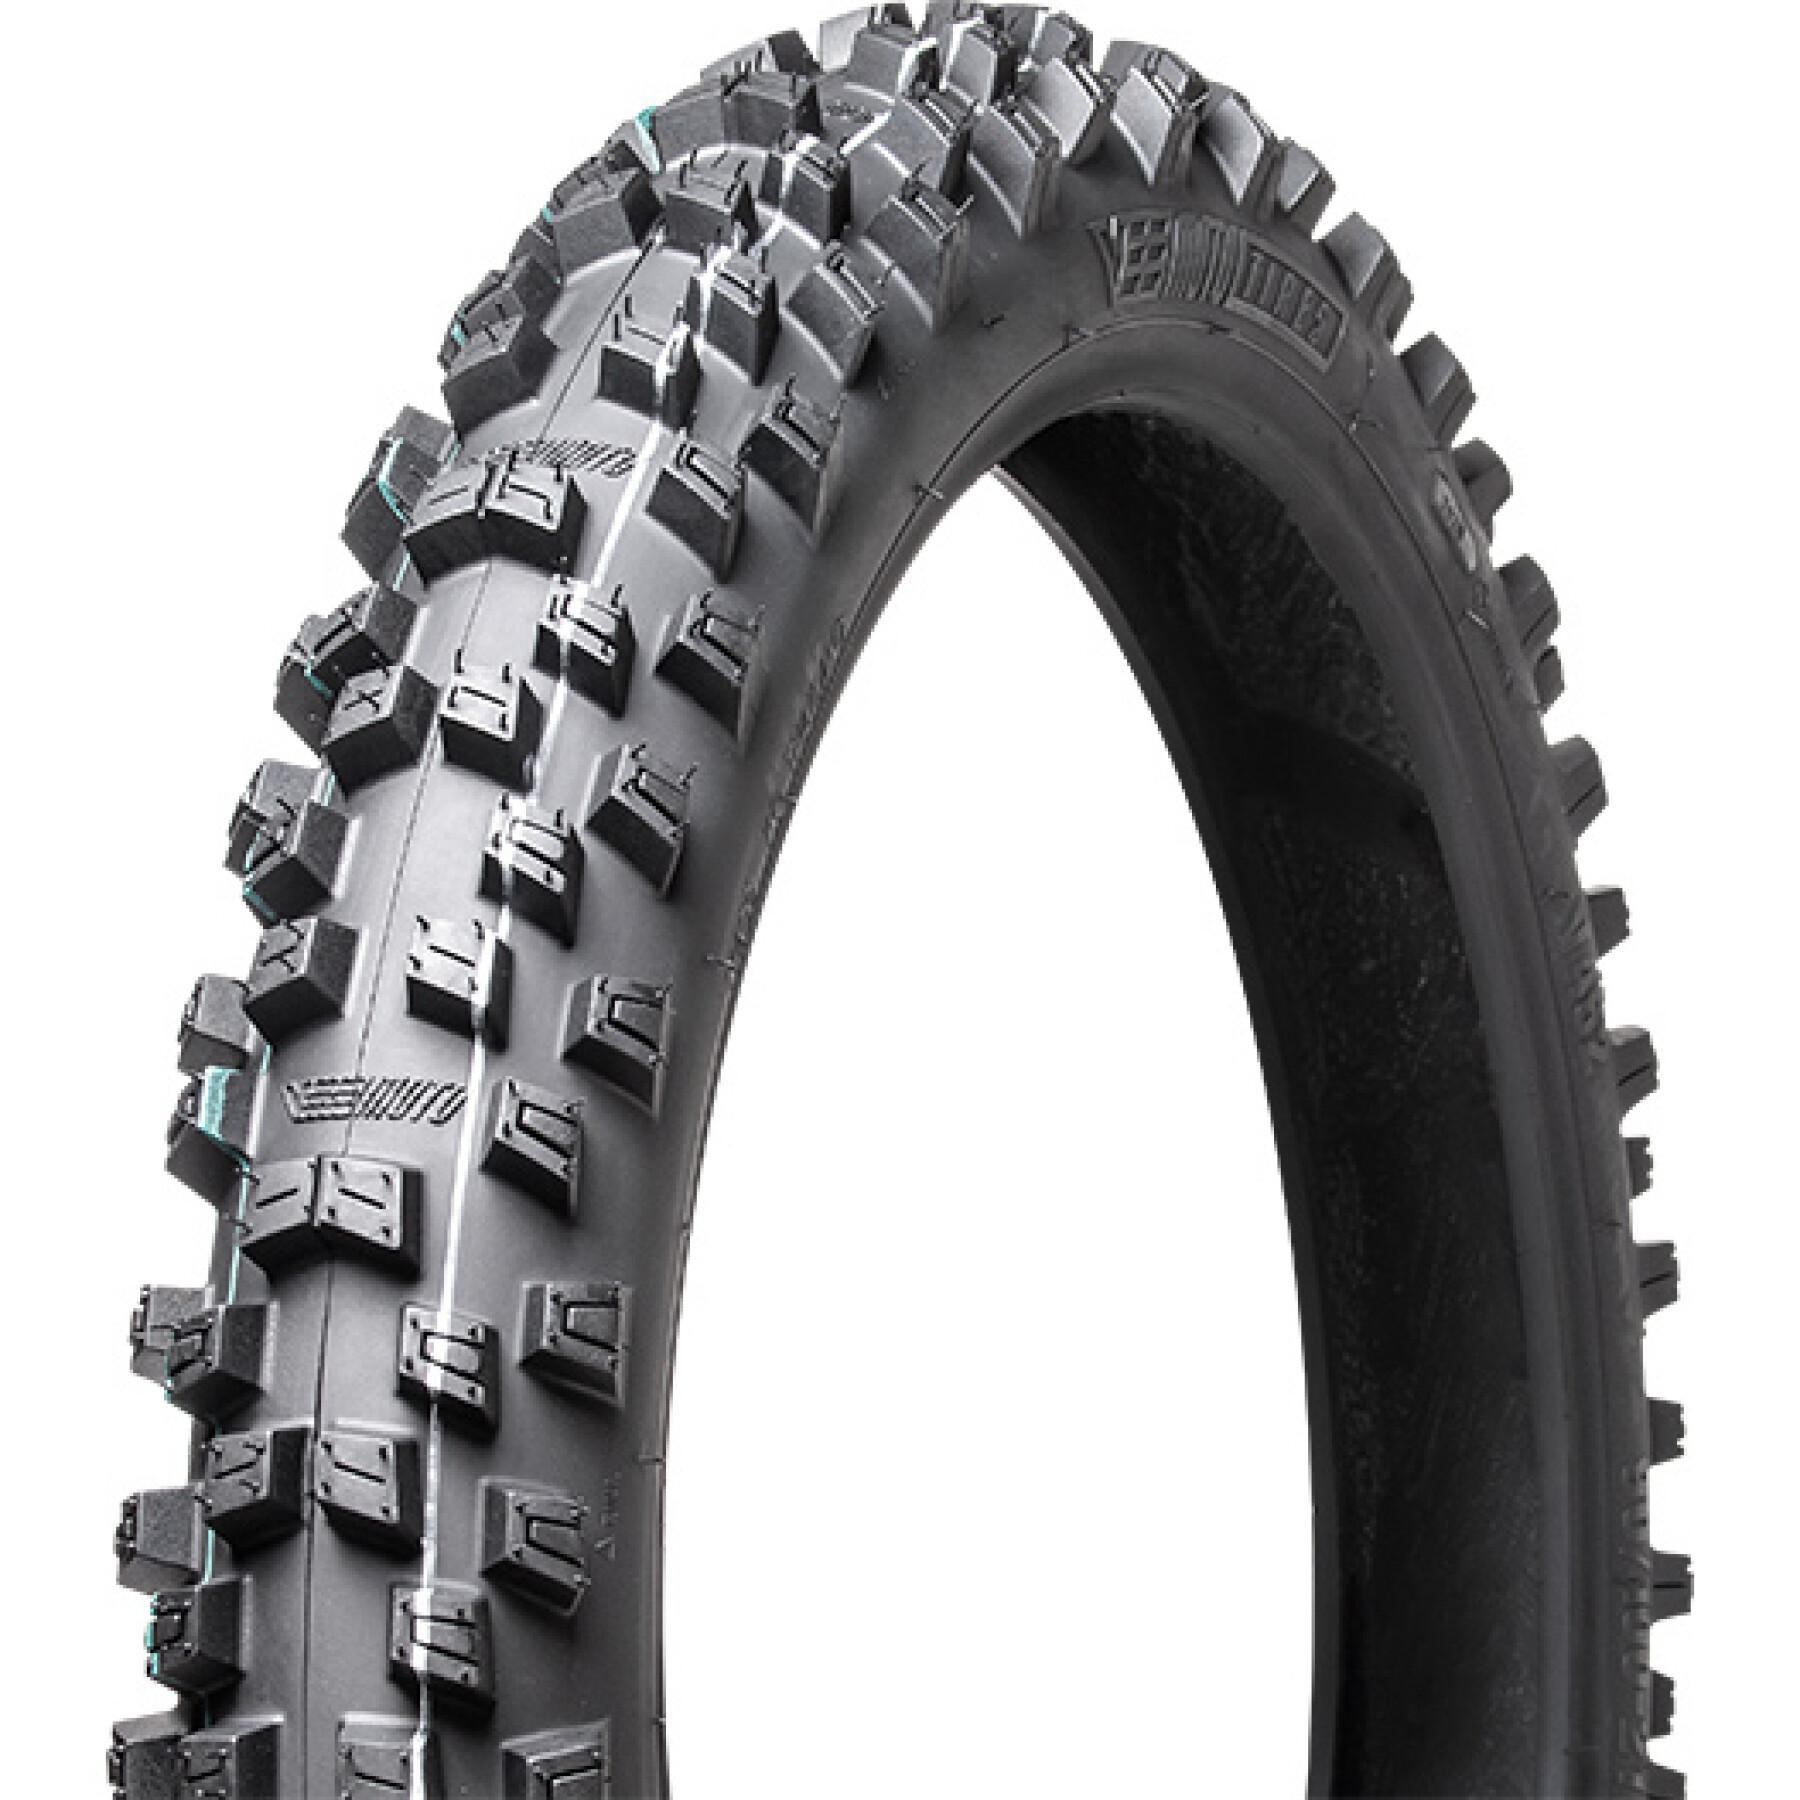 Band Vee Rubber 90/100-21 57M VRM462 TT (5) Force at